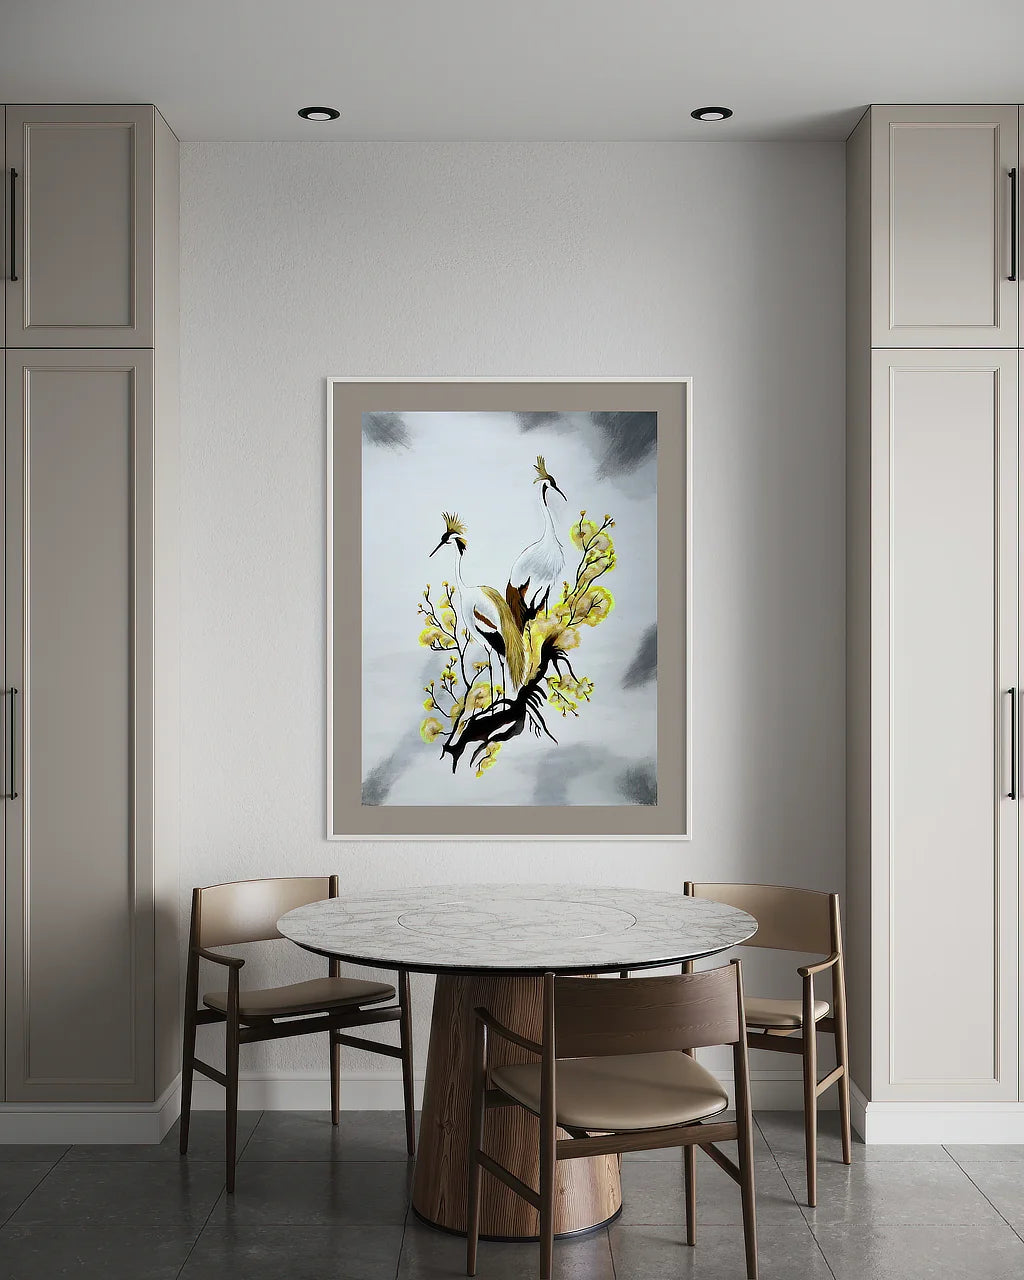 Cranes-not talking paper print by Sonia Malboeuf hanging by dining room